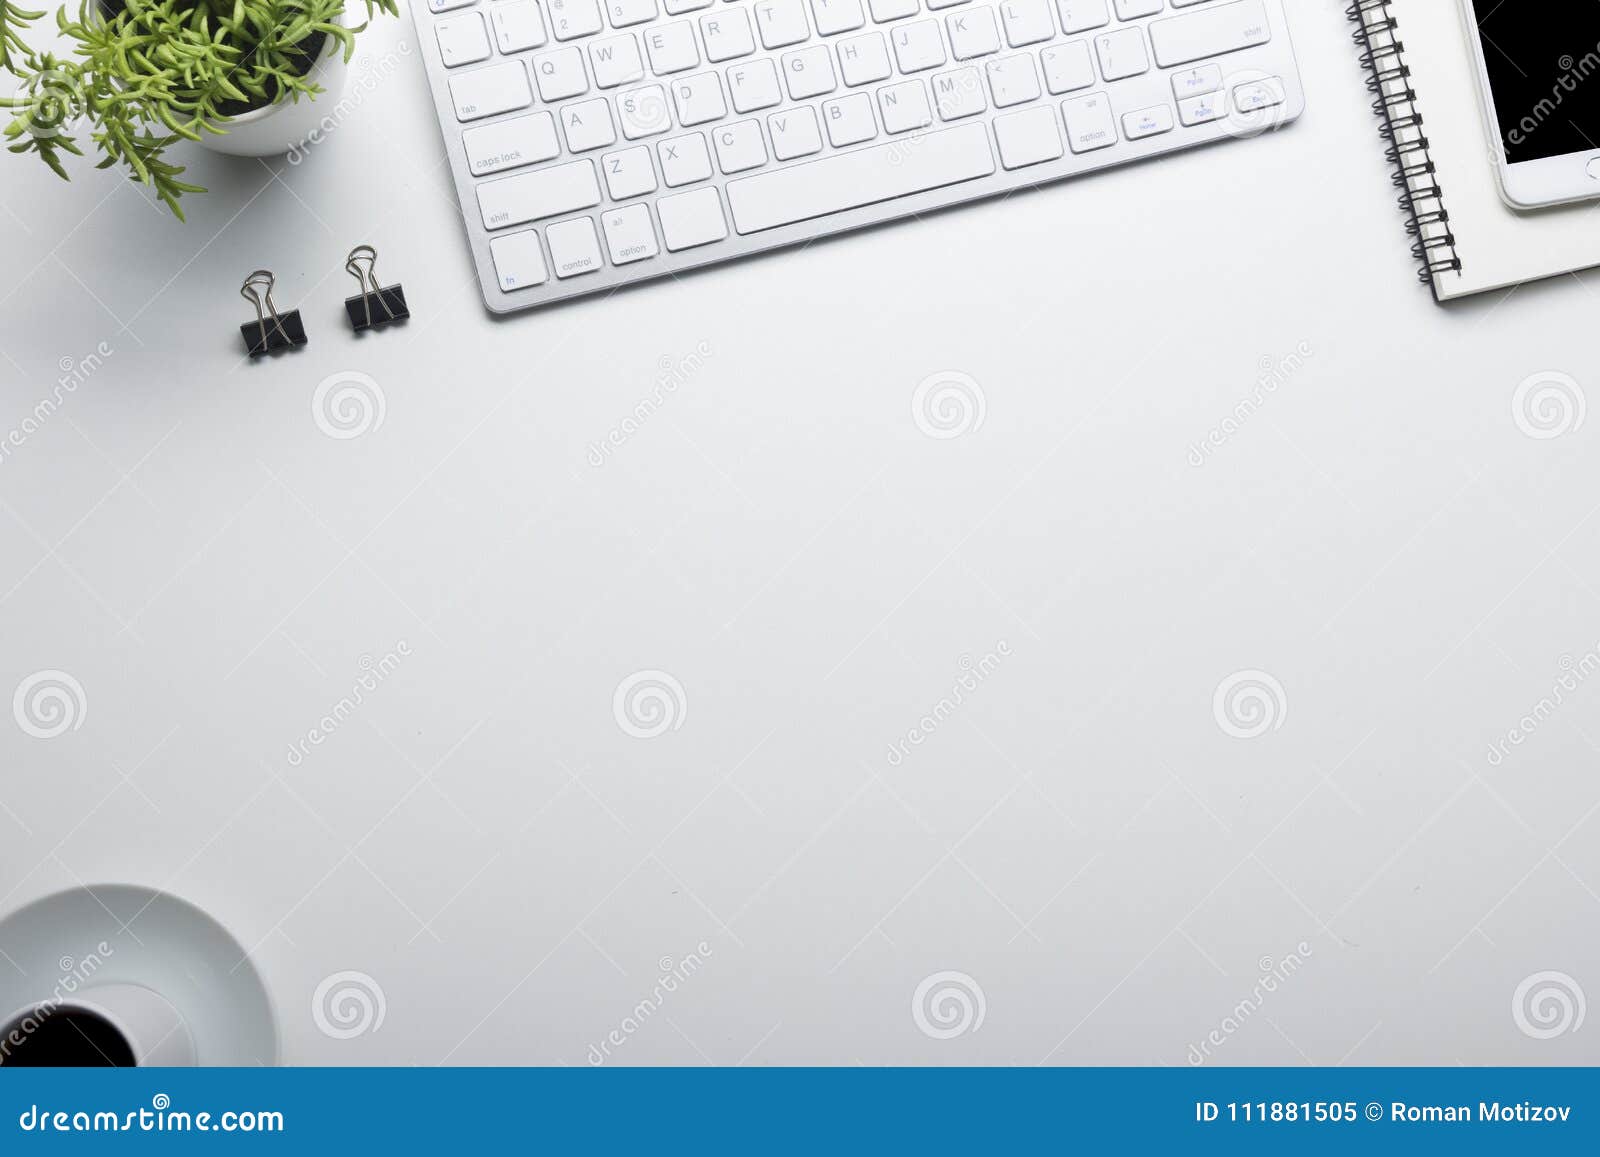 office desk table with supplies. flat lay business workplace and objects. top view. copy space for text